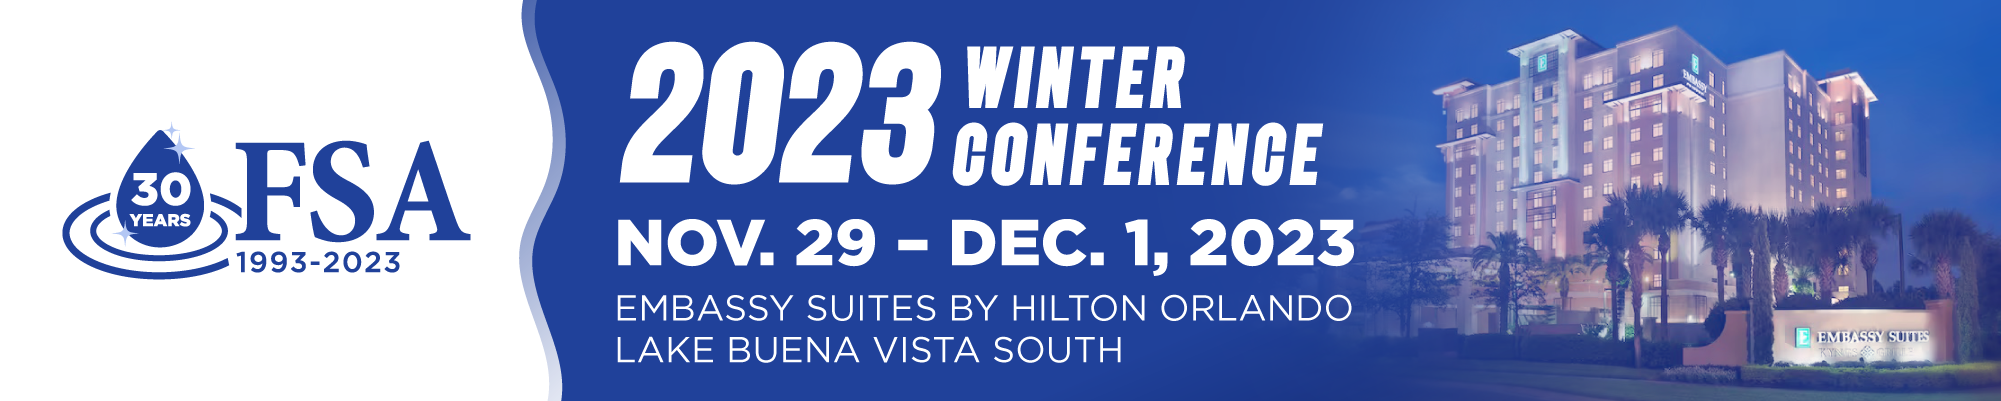 Winter Conference Banner